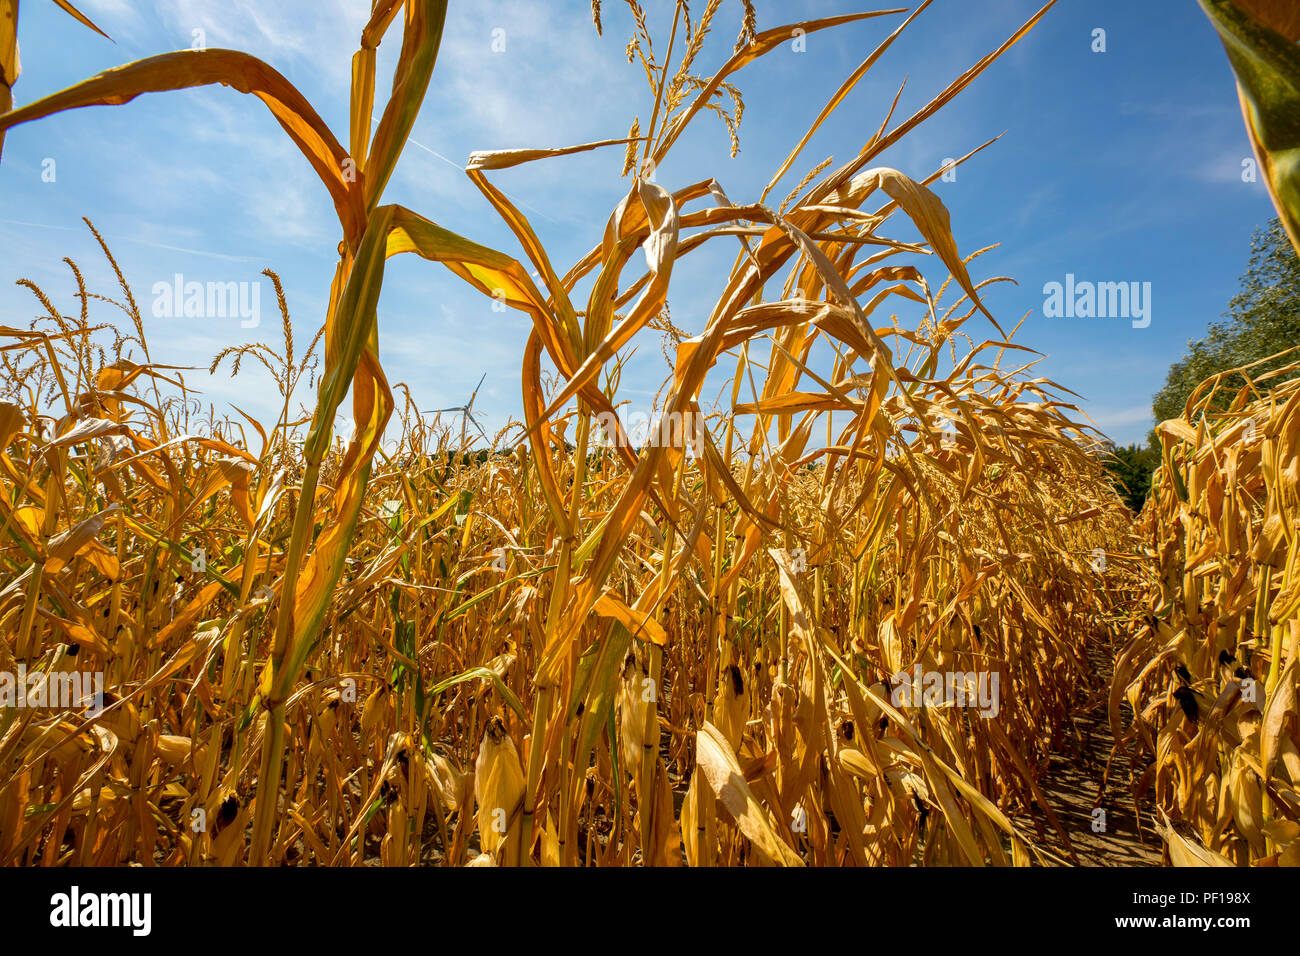 Corn field dried up and only grown low, small corn cobs, through the summer drought, drought, in Ostwestfalen Lippe, Germany, summer 2018, Stock Photo